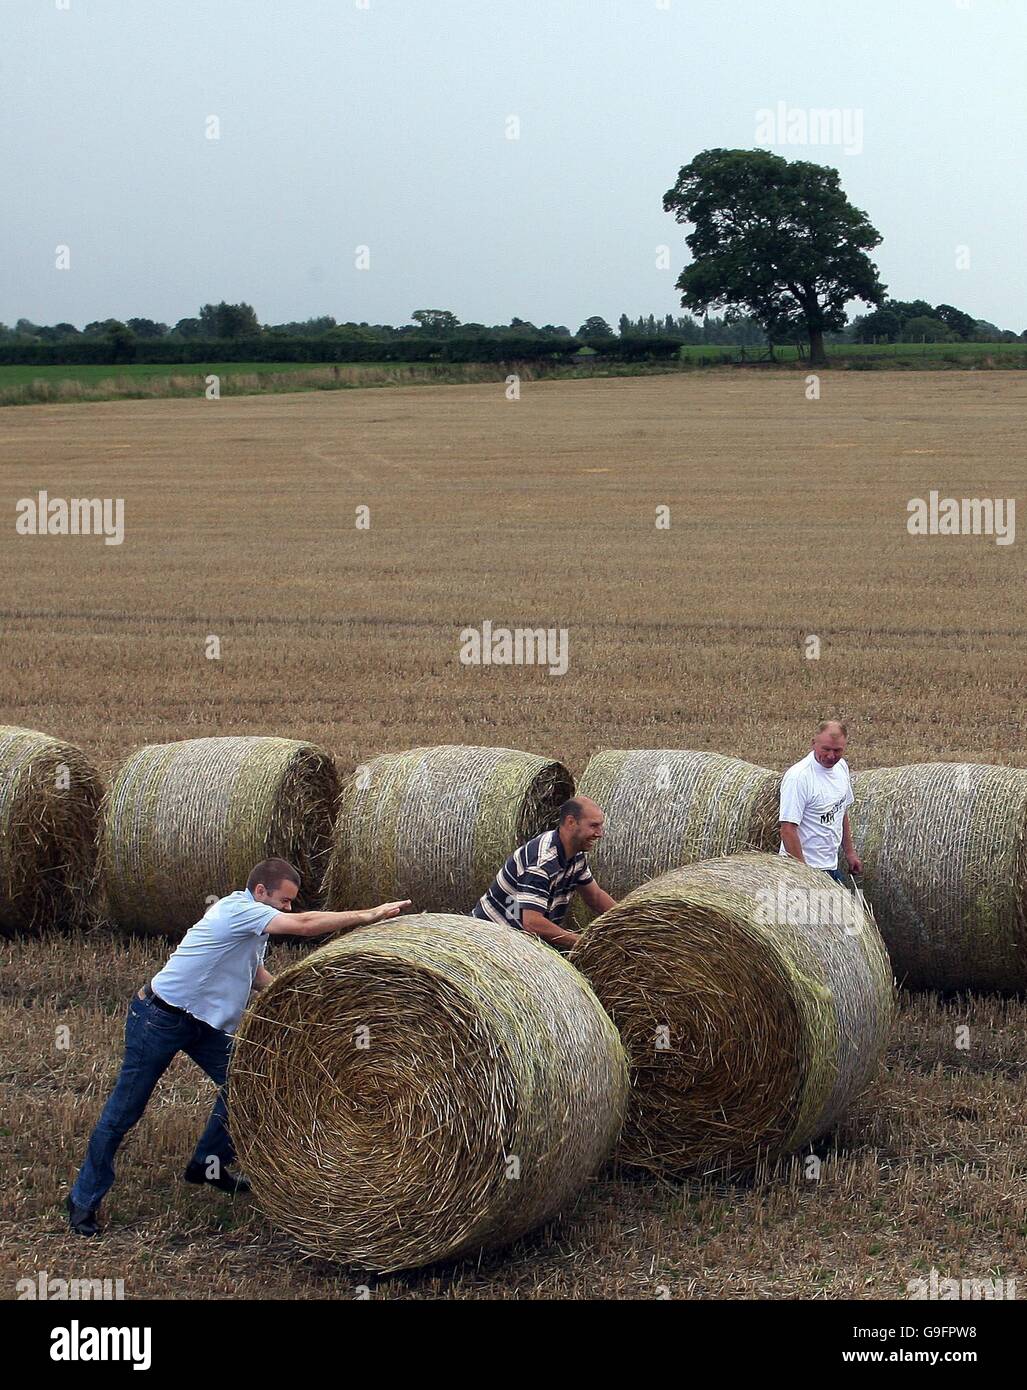 First straw bale rolling competition Stock Photo